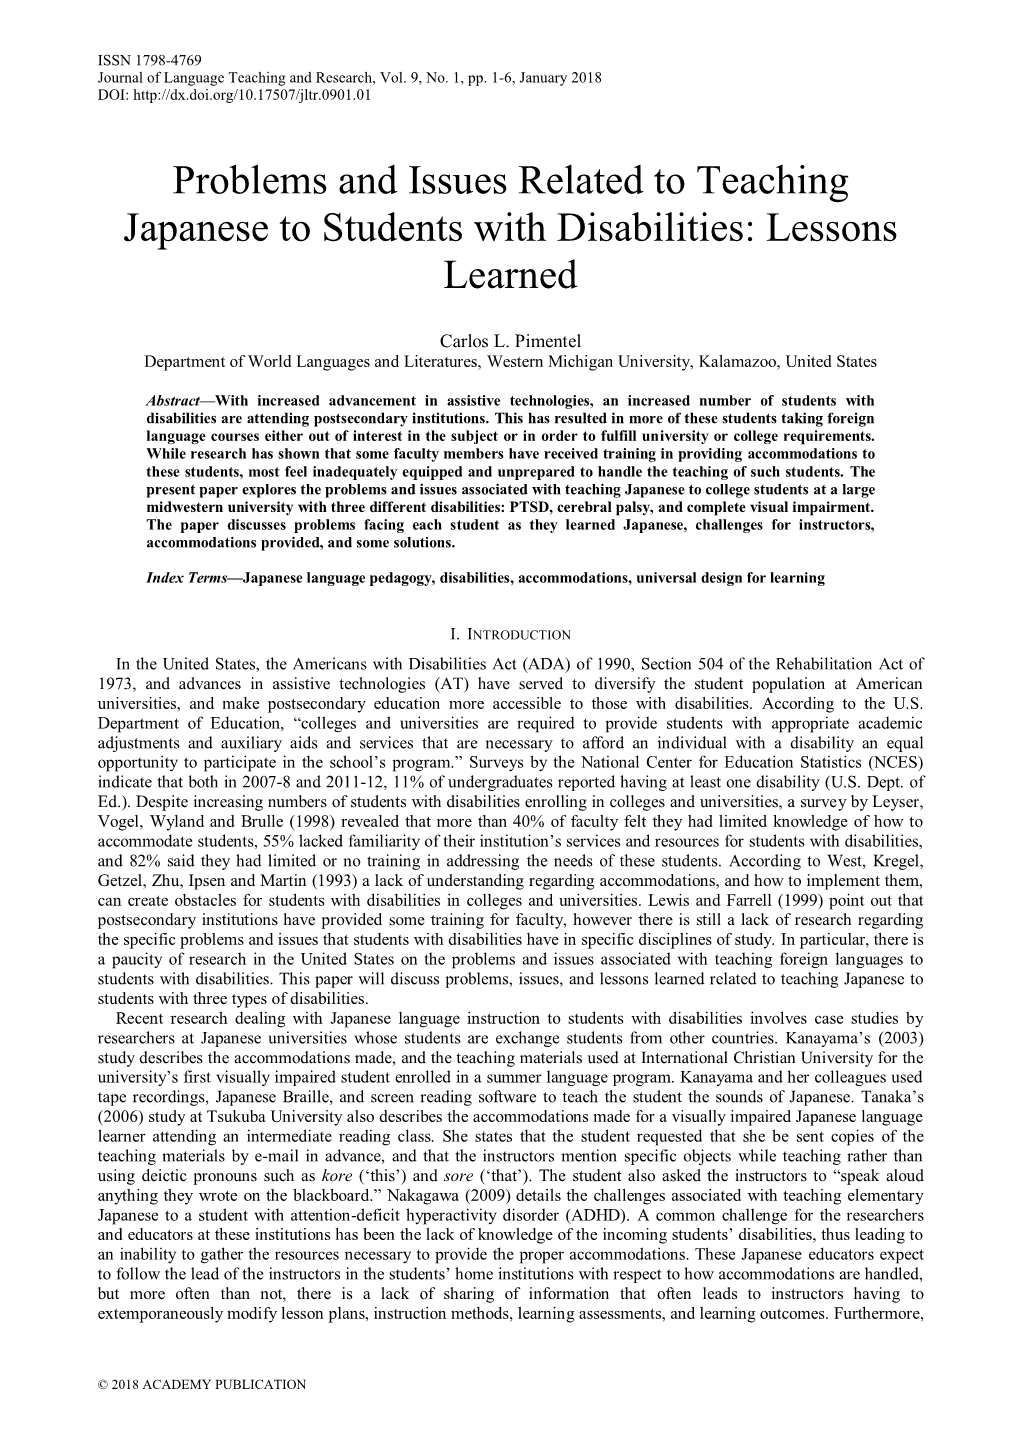 Problems and Issues Related to Teaching Japanese to Students with Disabilities: Lessons Learned